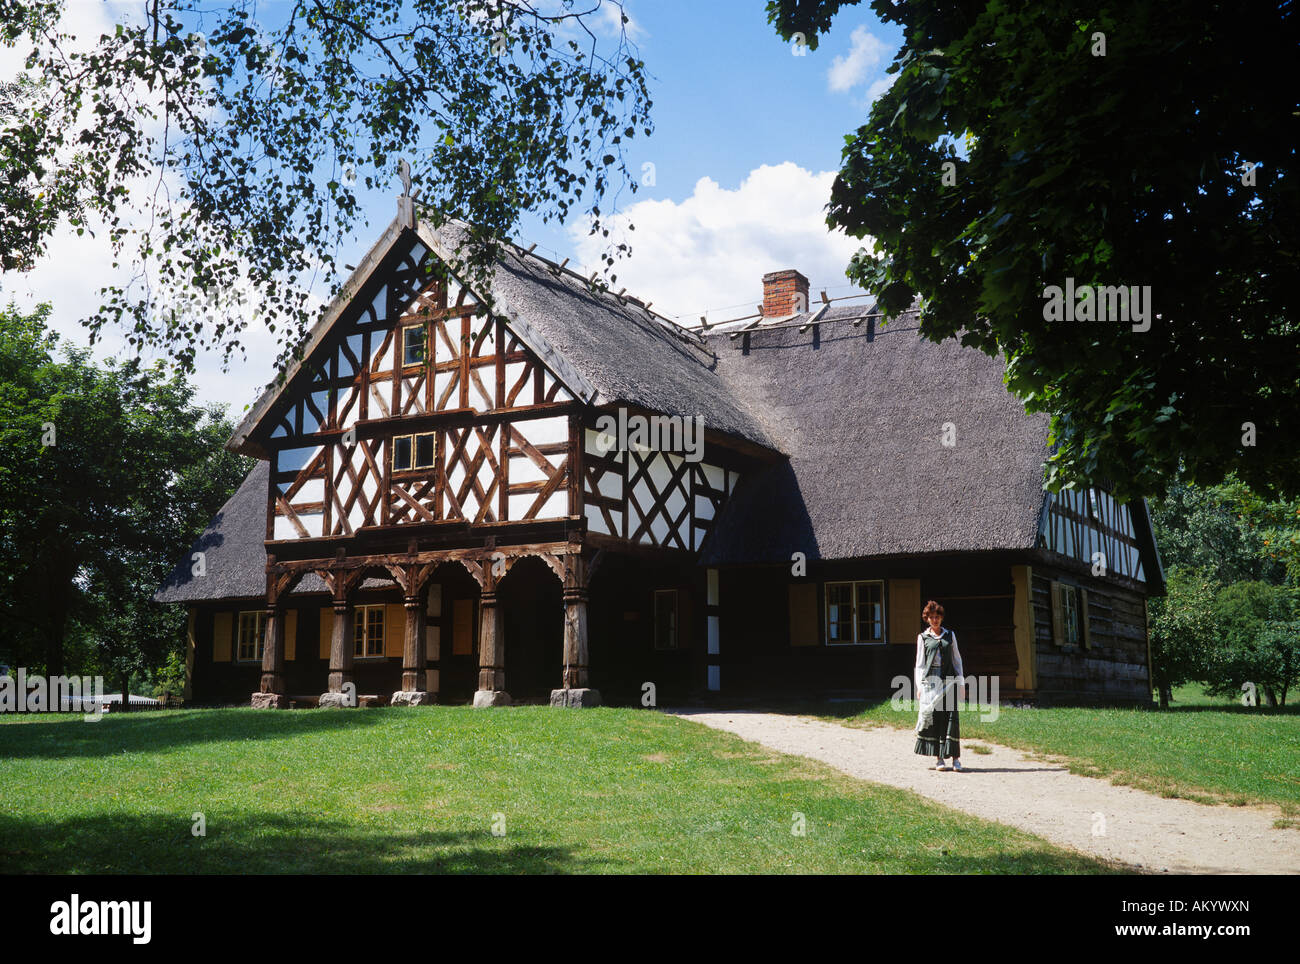 Open-air museum in Olsztynek for traditional country-style architecture in masuria with a typical half-timbered construction. Stock Photo